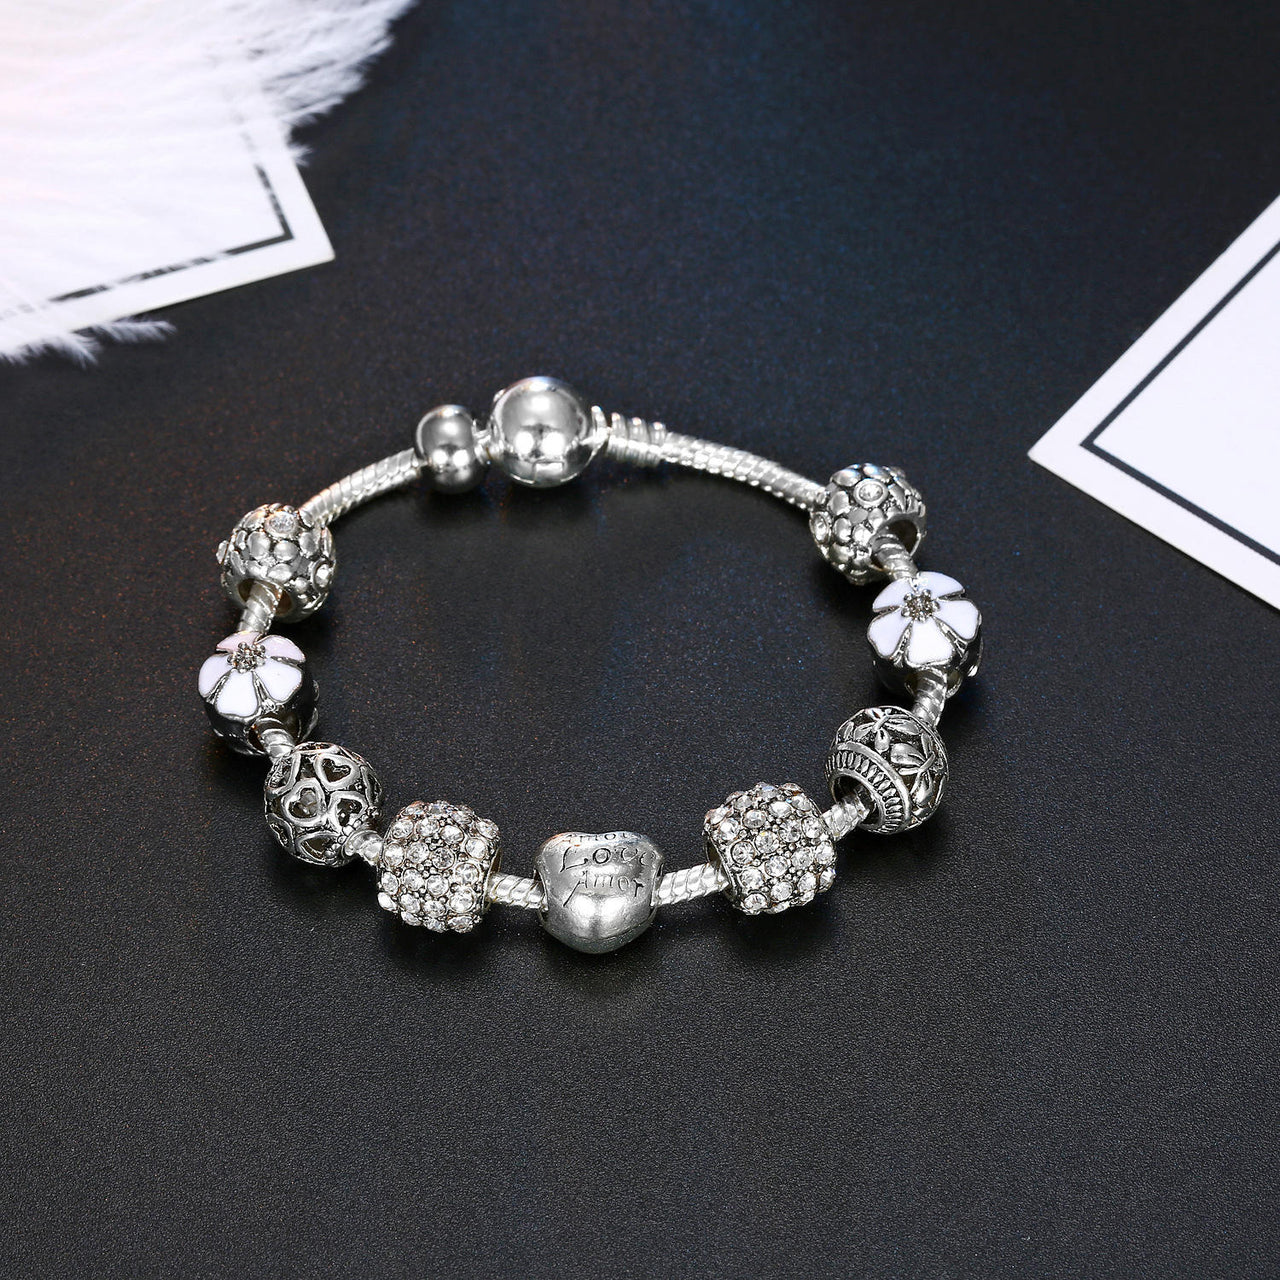 Silver Gothic Charm Bracelet - Sarah Stitches's Ko-fi Shop - Ko-fi ❤️ Where  creators get support from fans through donations, memberships, shop sales  and more! The original 'Buy Me a Coffee' Page.